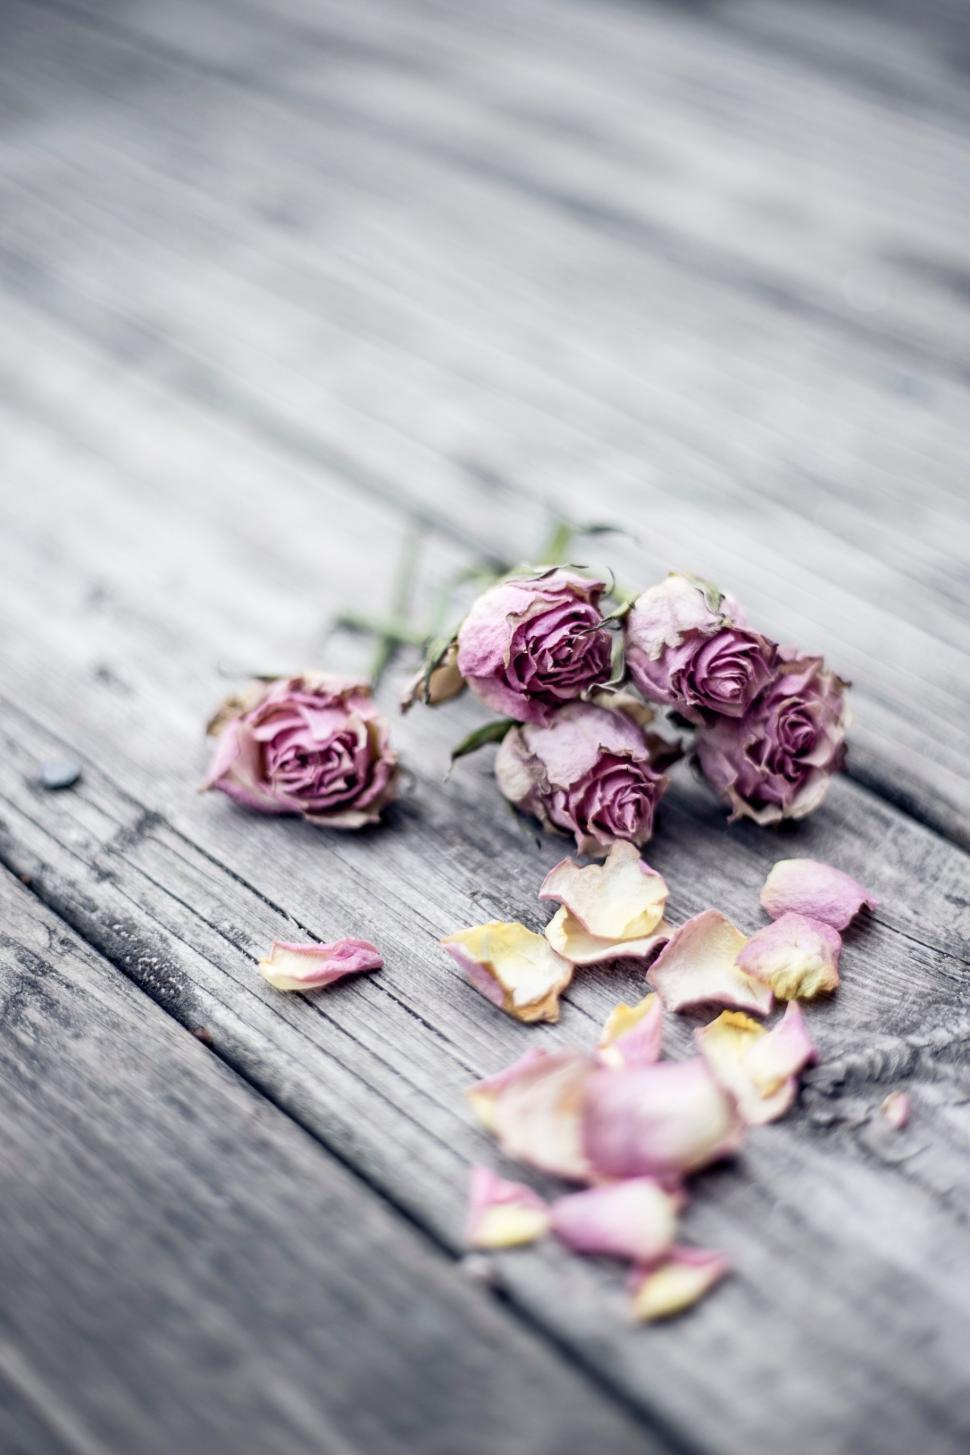 Free Image of Dried Flowers on Wooden Table 